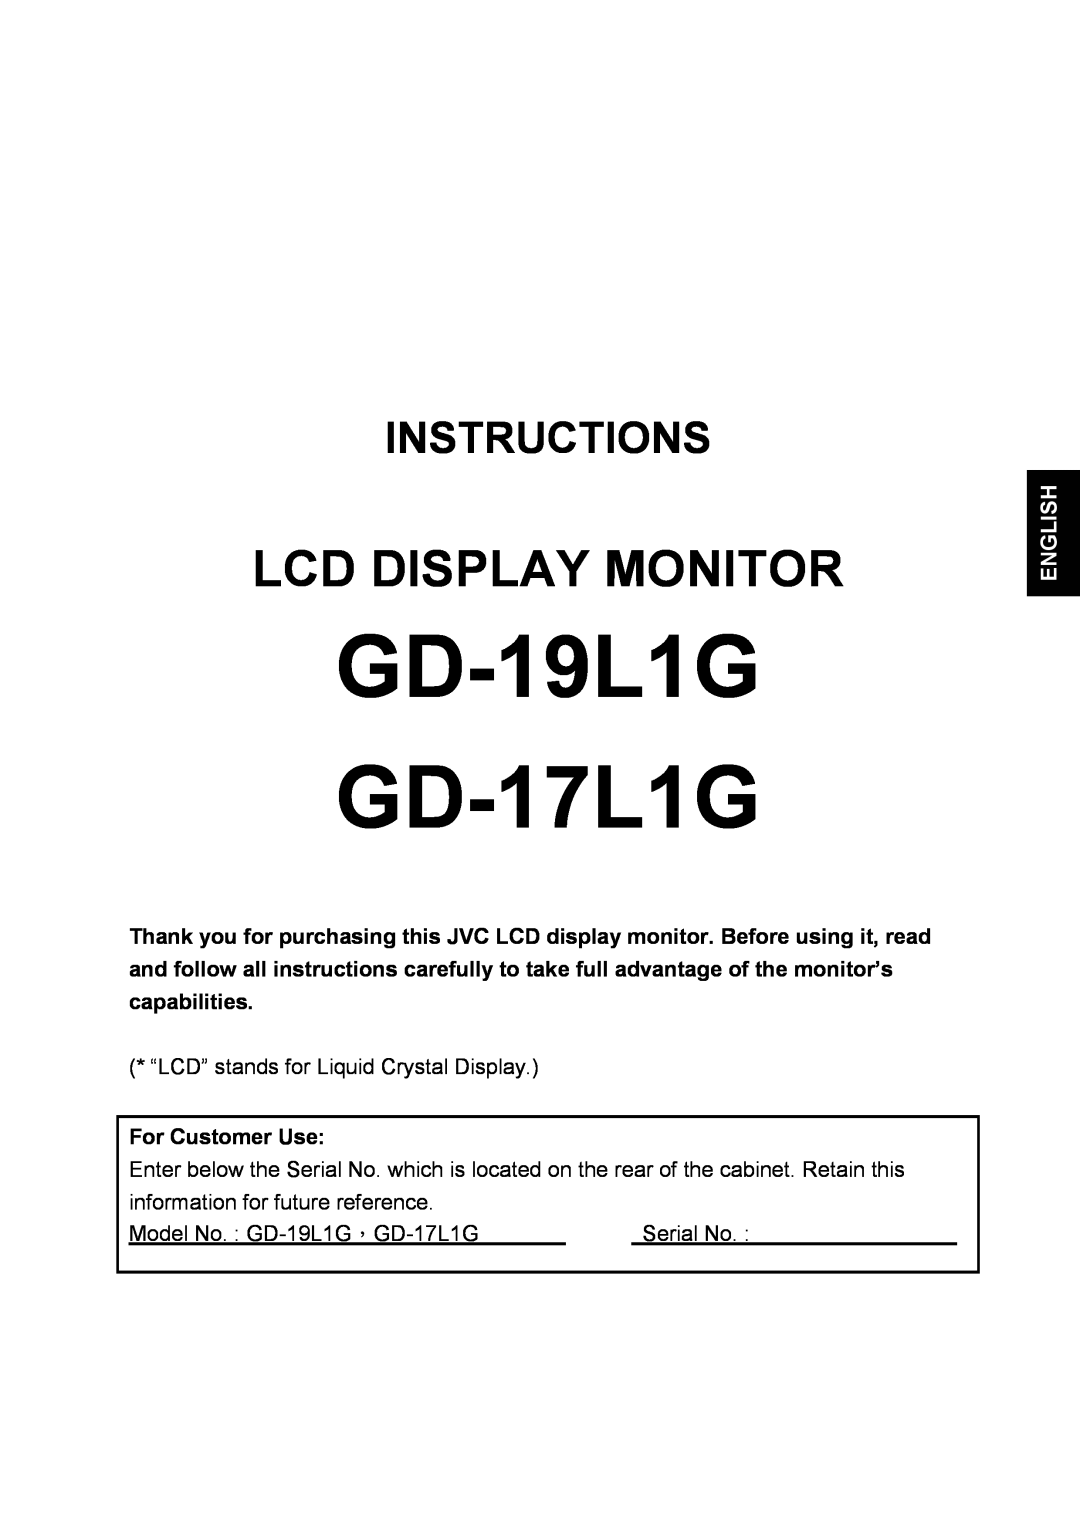 JVC manual Instructions, “LCD” stands for Liquid Crystal Display, For Customer Use, Model No. GD-19L1G，GD-17L1G 